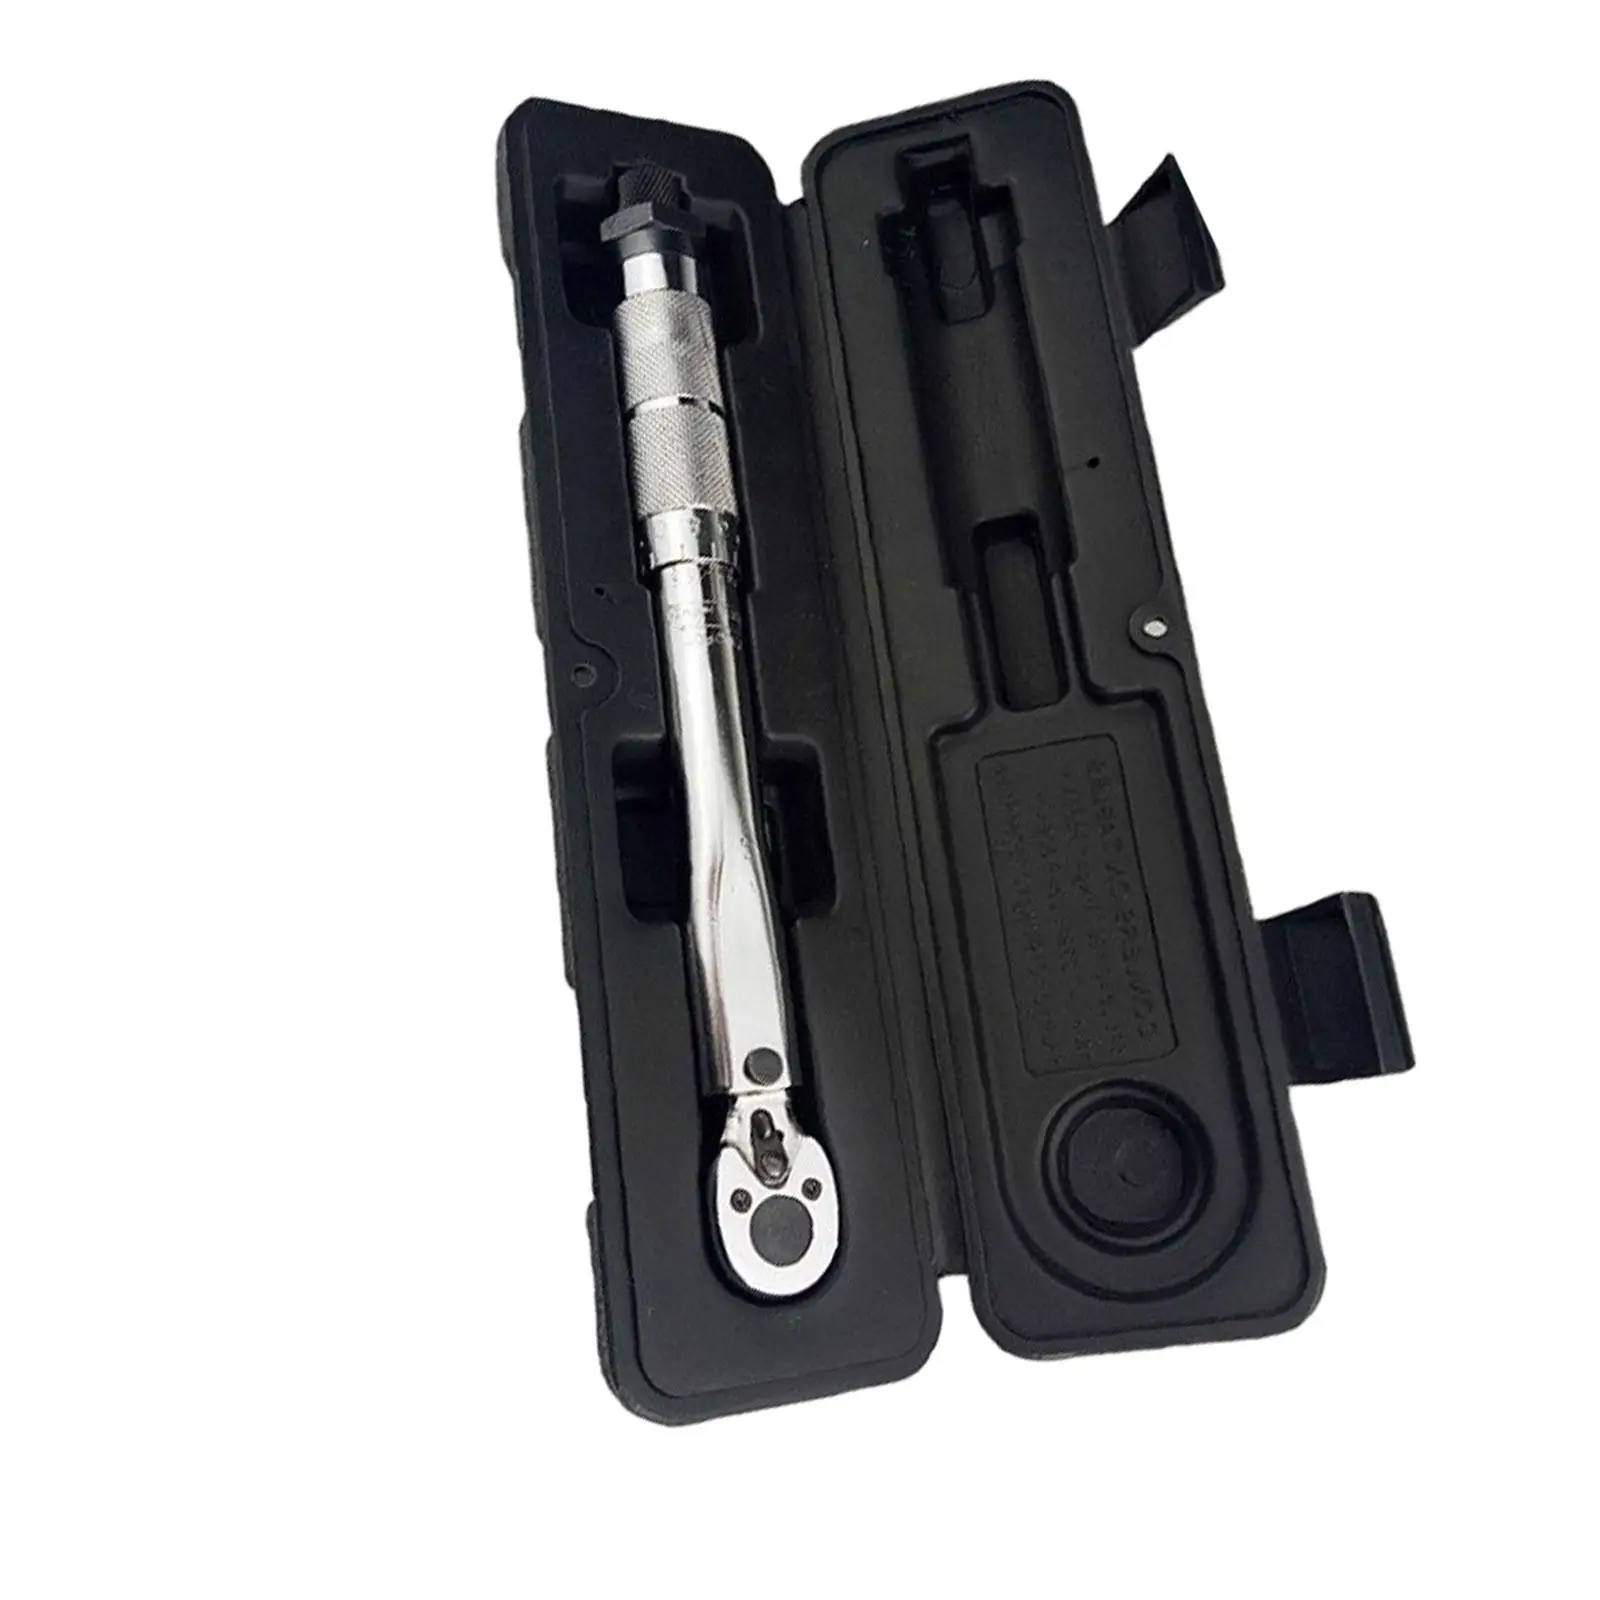 1/4inch Drive Torque Wrench with Storage Box Versatile Length 27.4cm Durable Professional Hand Spanner 5-25nm Adjustable